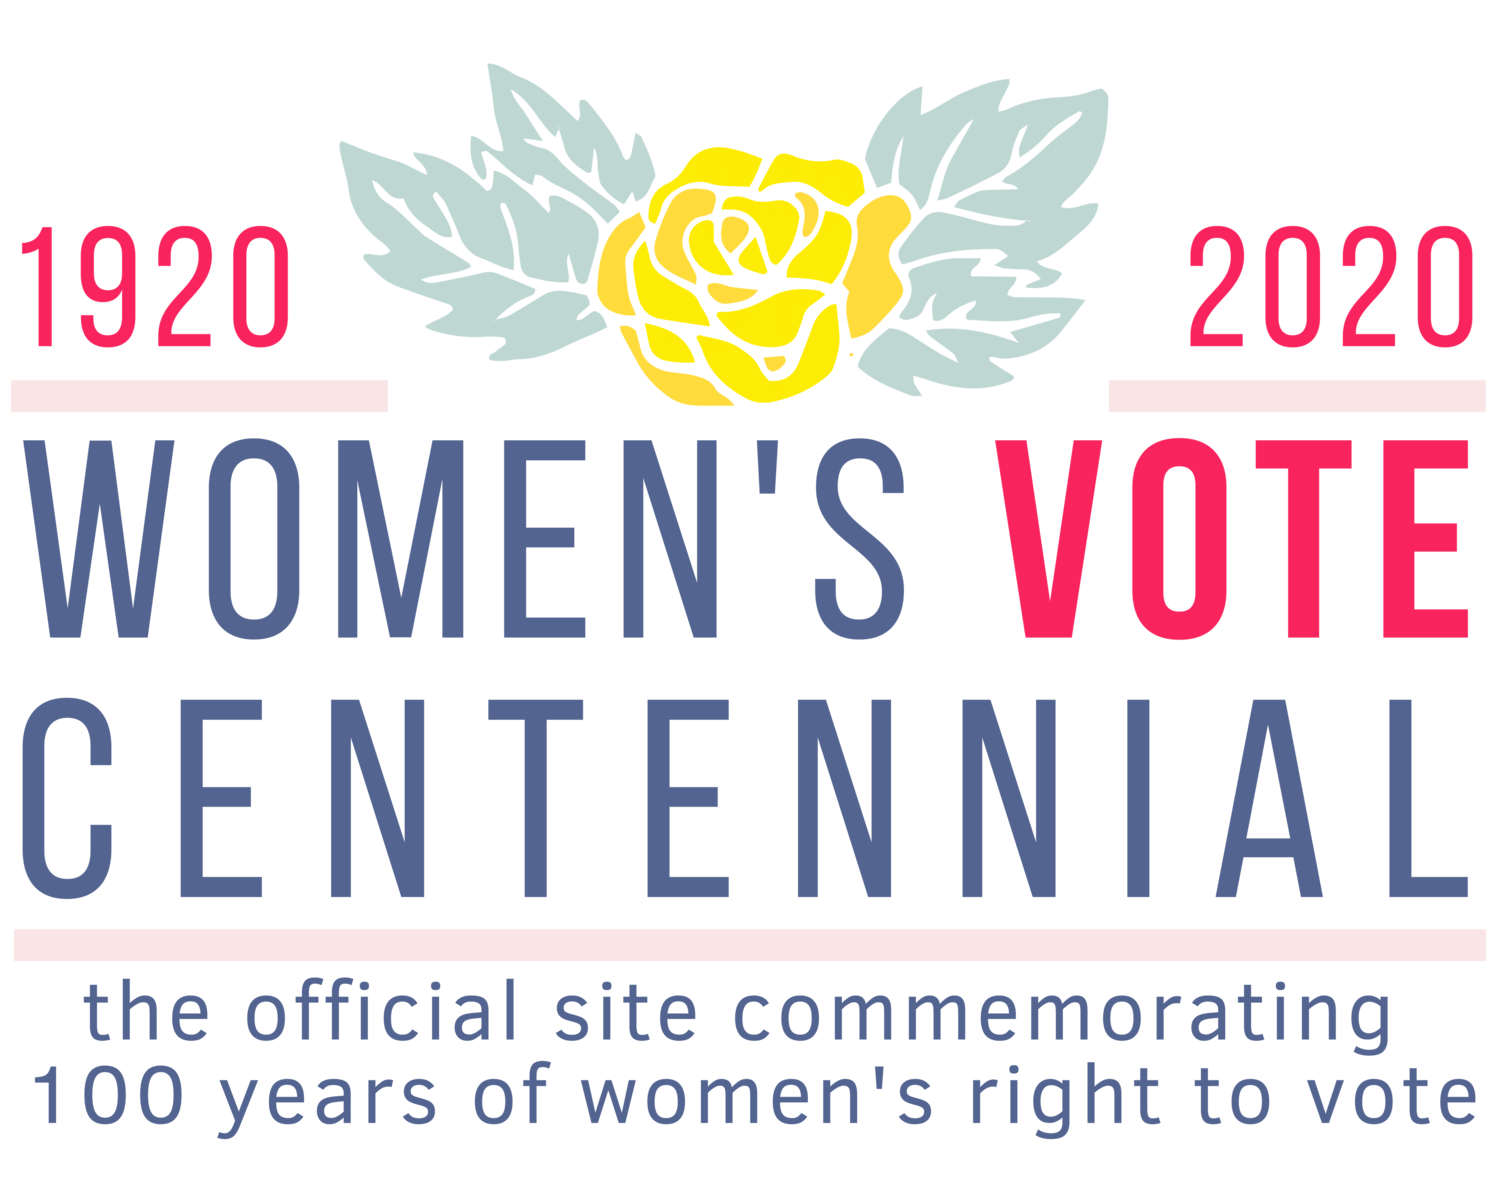 LIBERTY VOTE 3” Medal-FIESTA 2020-CELEBRATING 100 YEARS OF WOMEN’s SUFFRAGE 